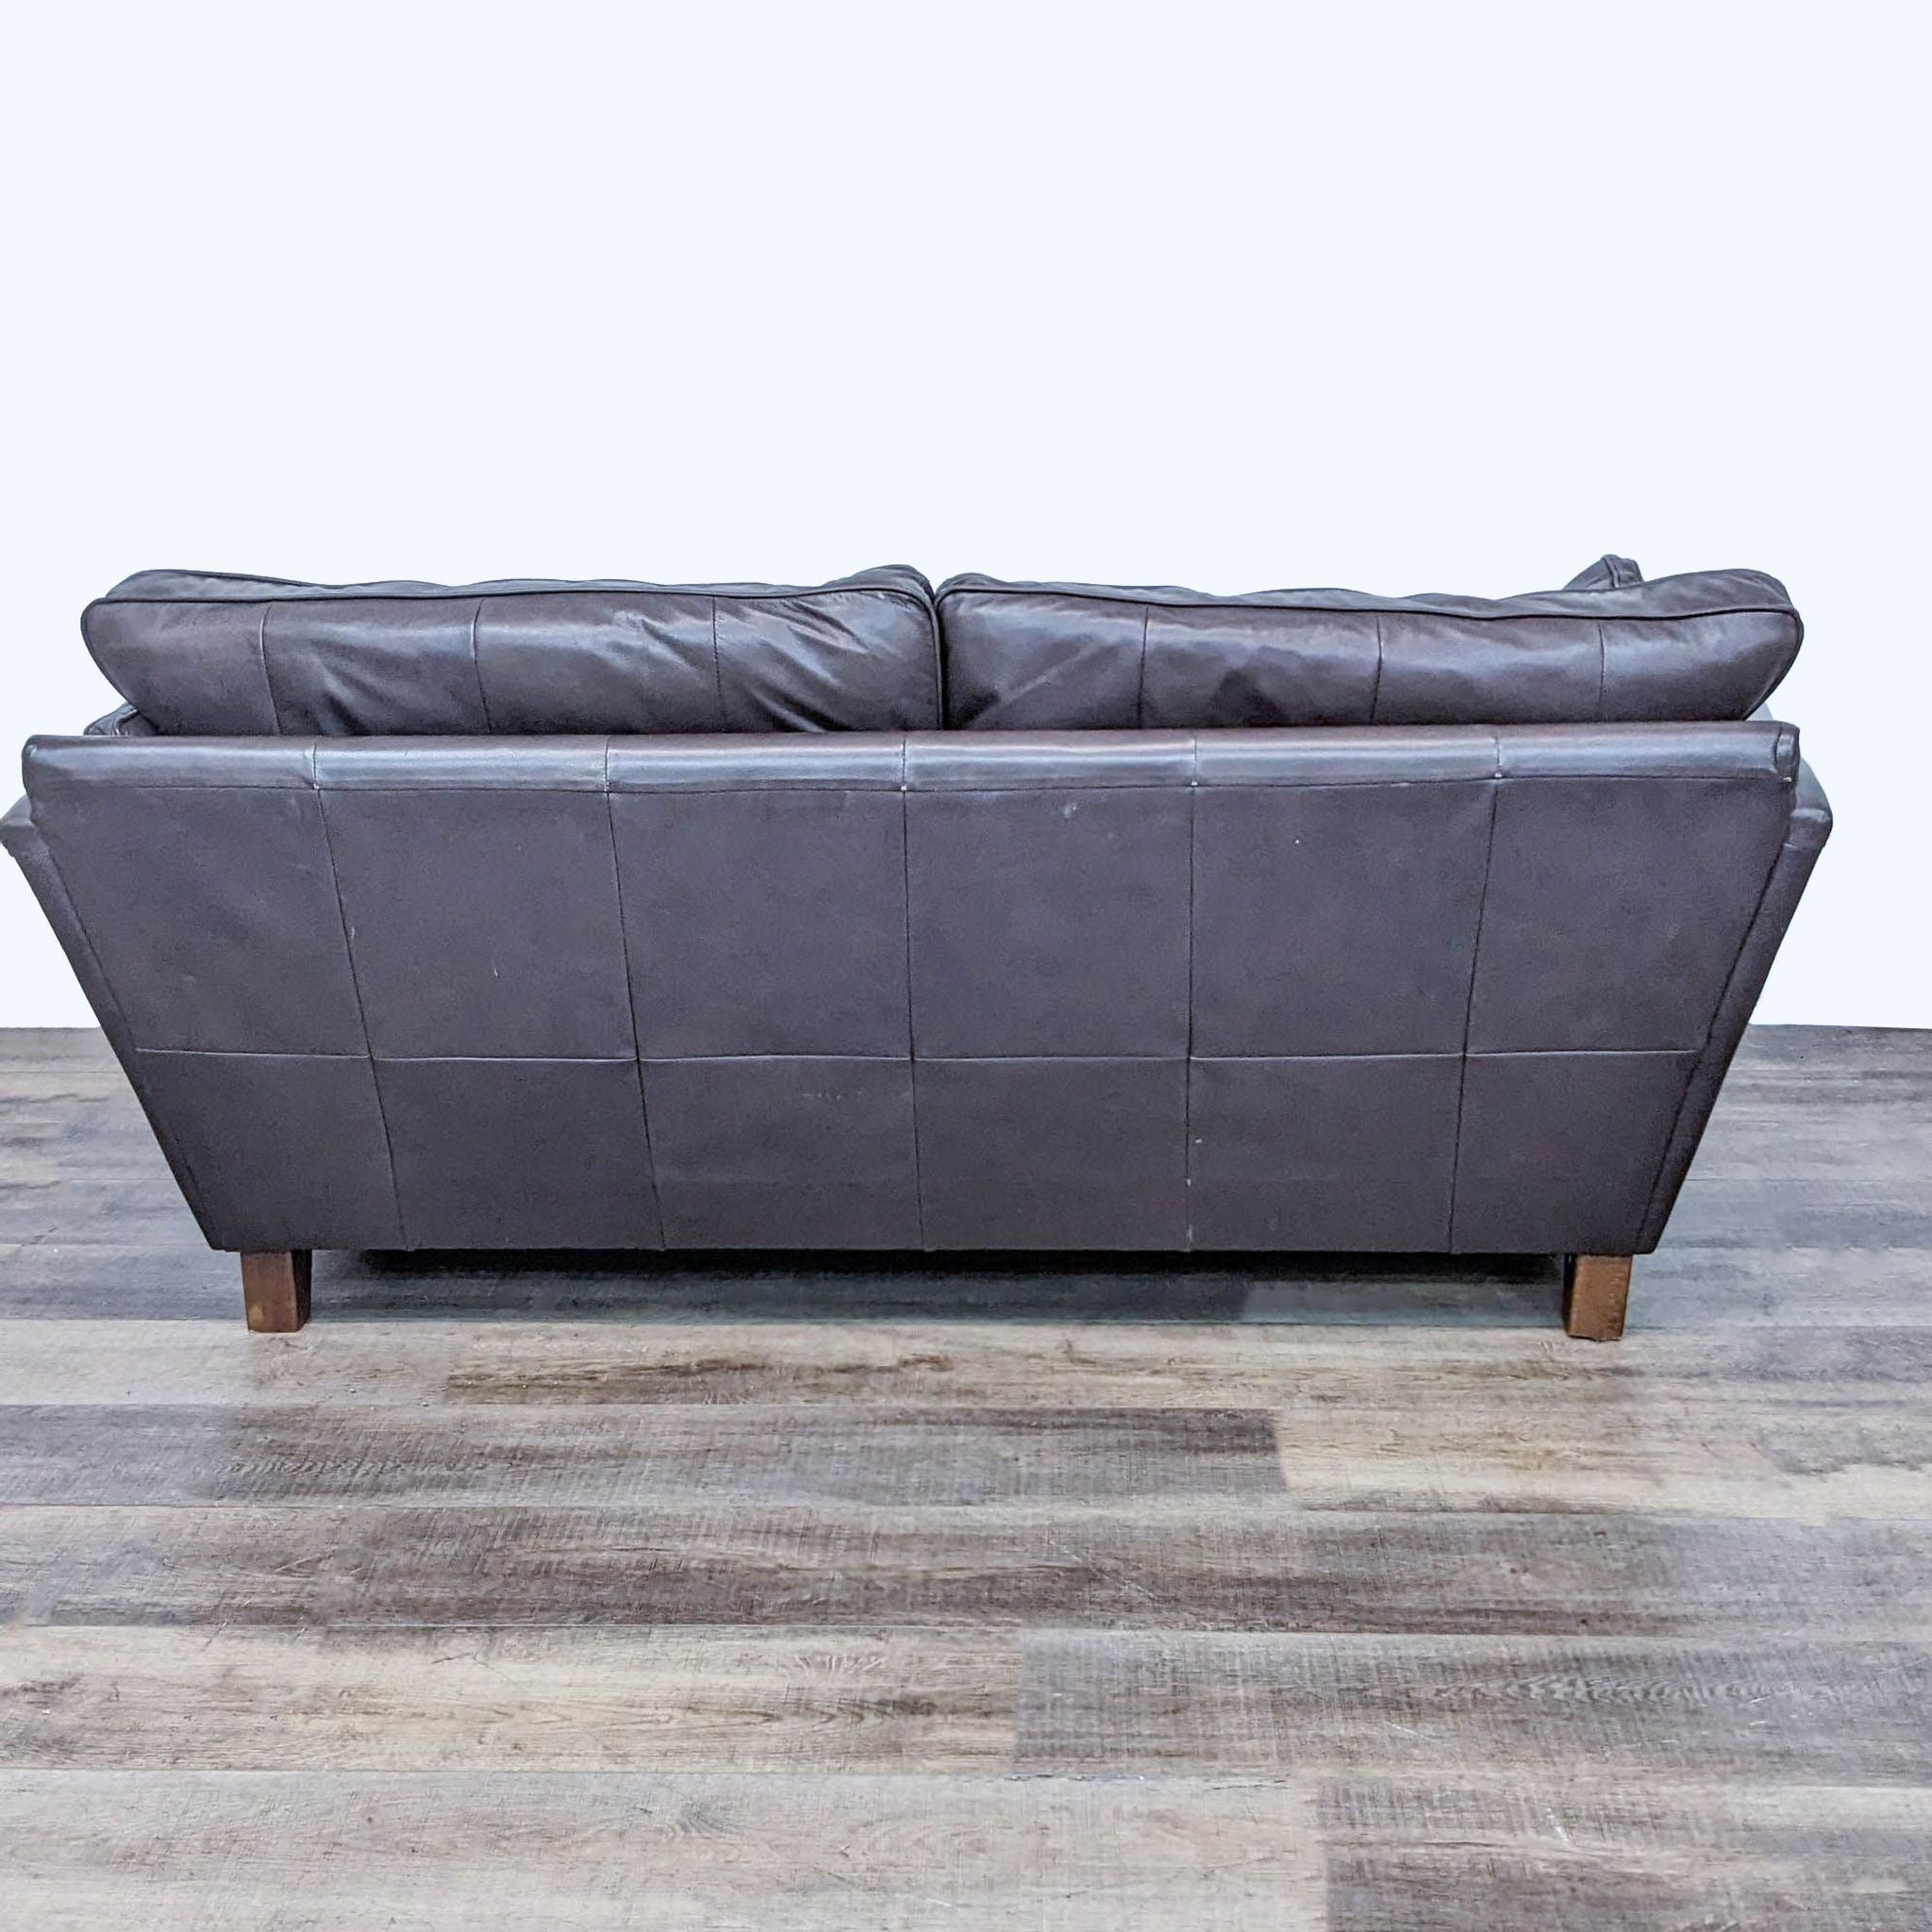 Marks & Spencer 3-seat leather sofa showcasing back and side angle, with flared arms and wood feet.